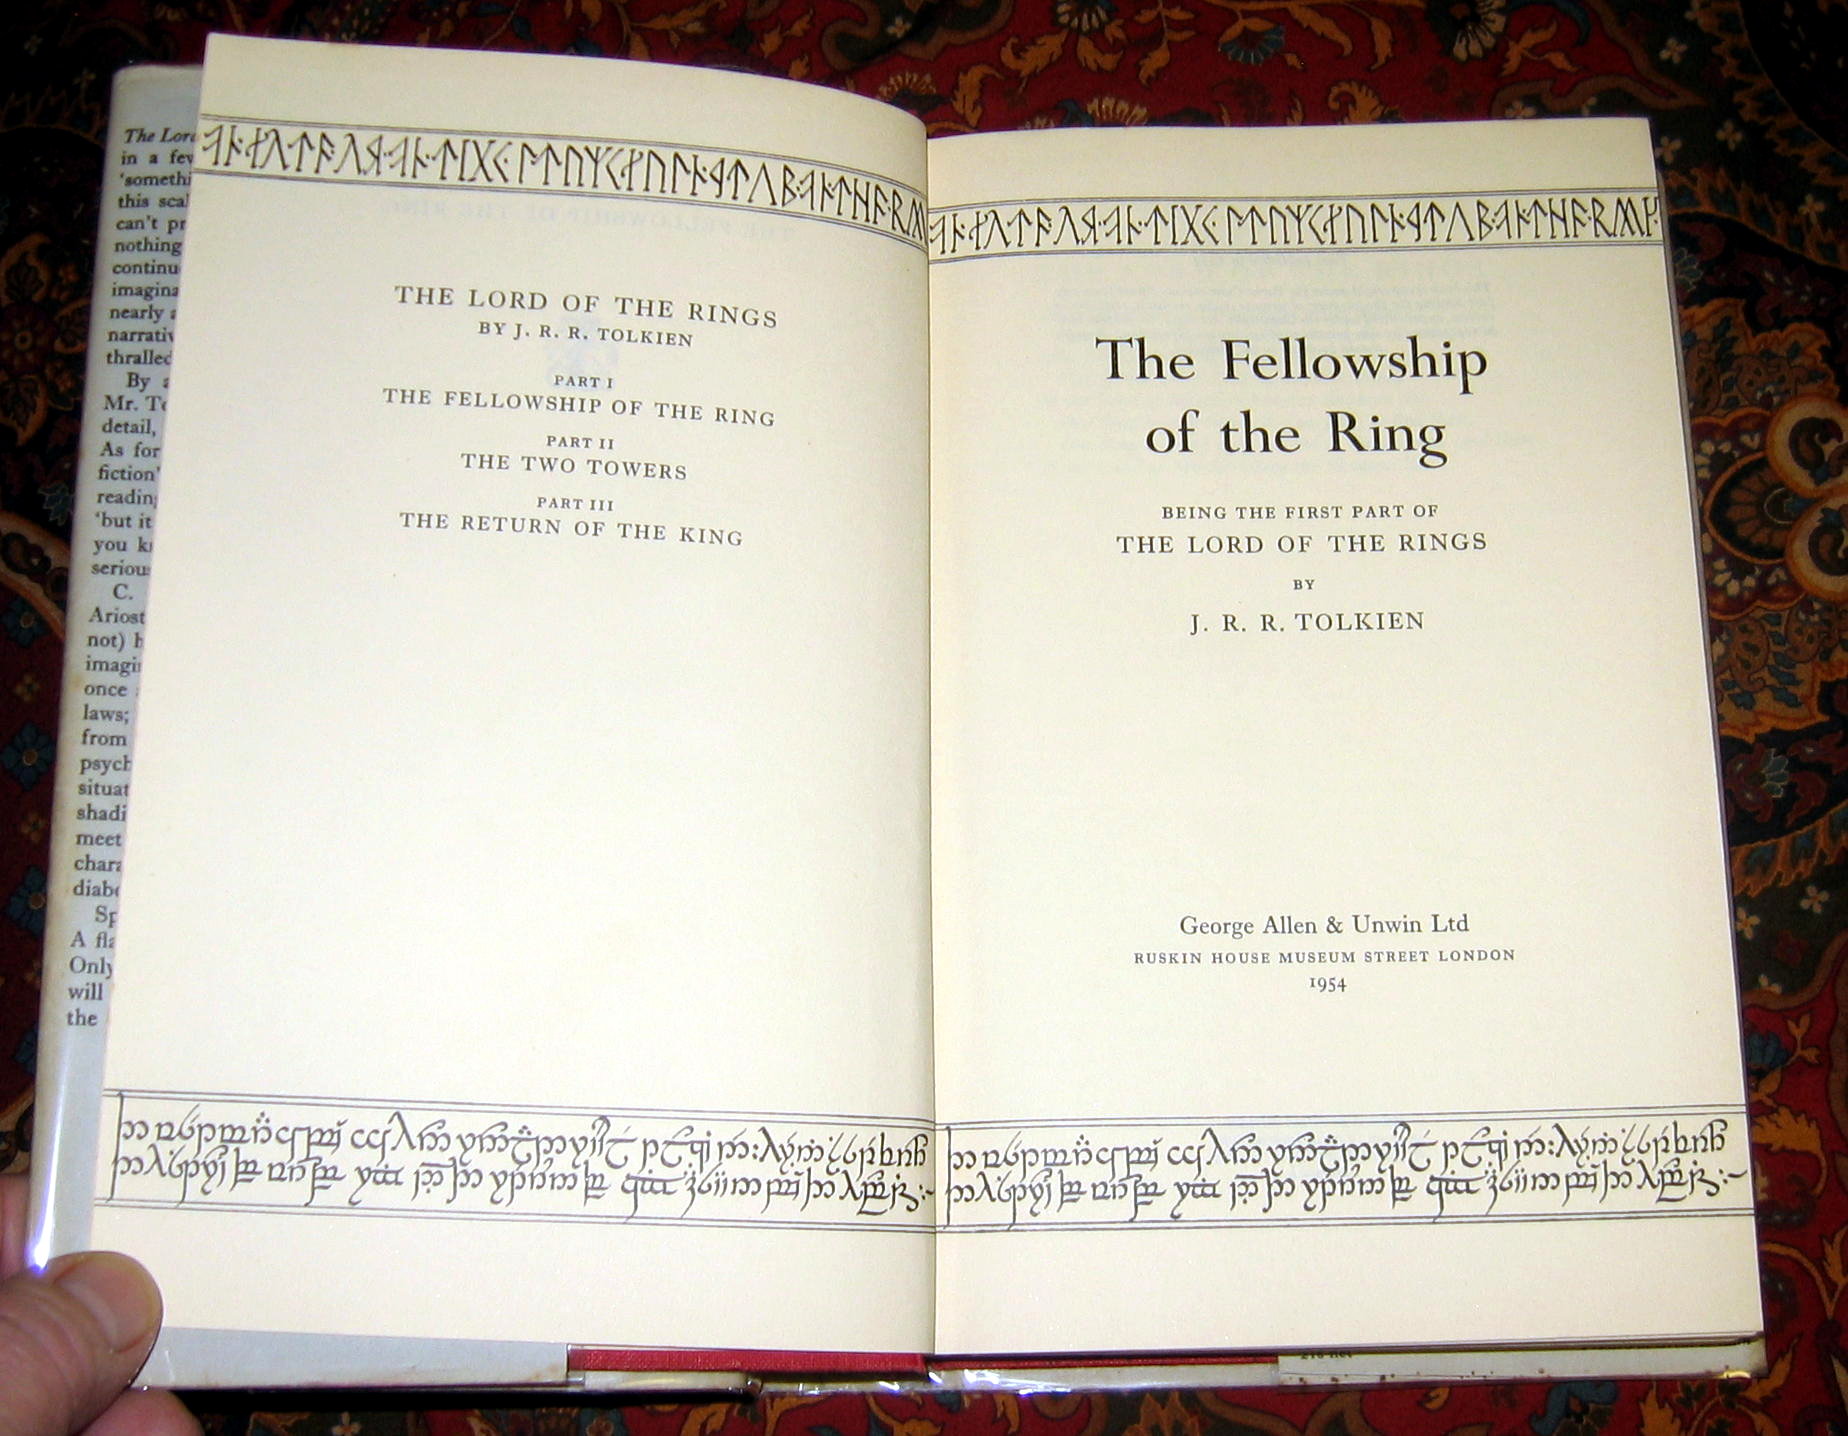 The Fellowship of the Ring is a 1st UK Edition, 1st impression with the book in Very Good Plus/Near Fine condition.